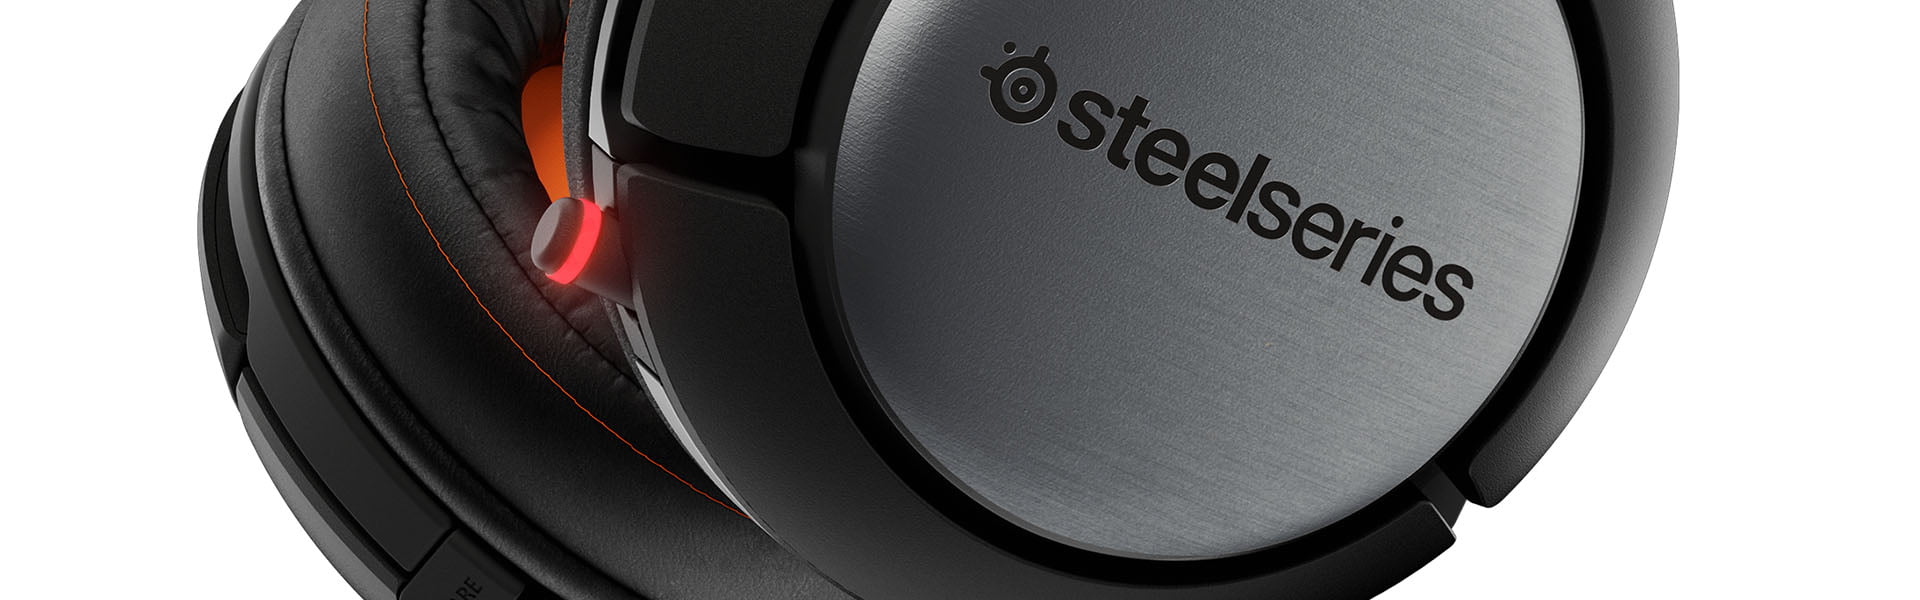 SteelSeries Siberia 840 Now Available 14